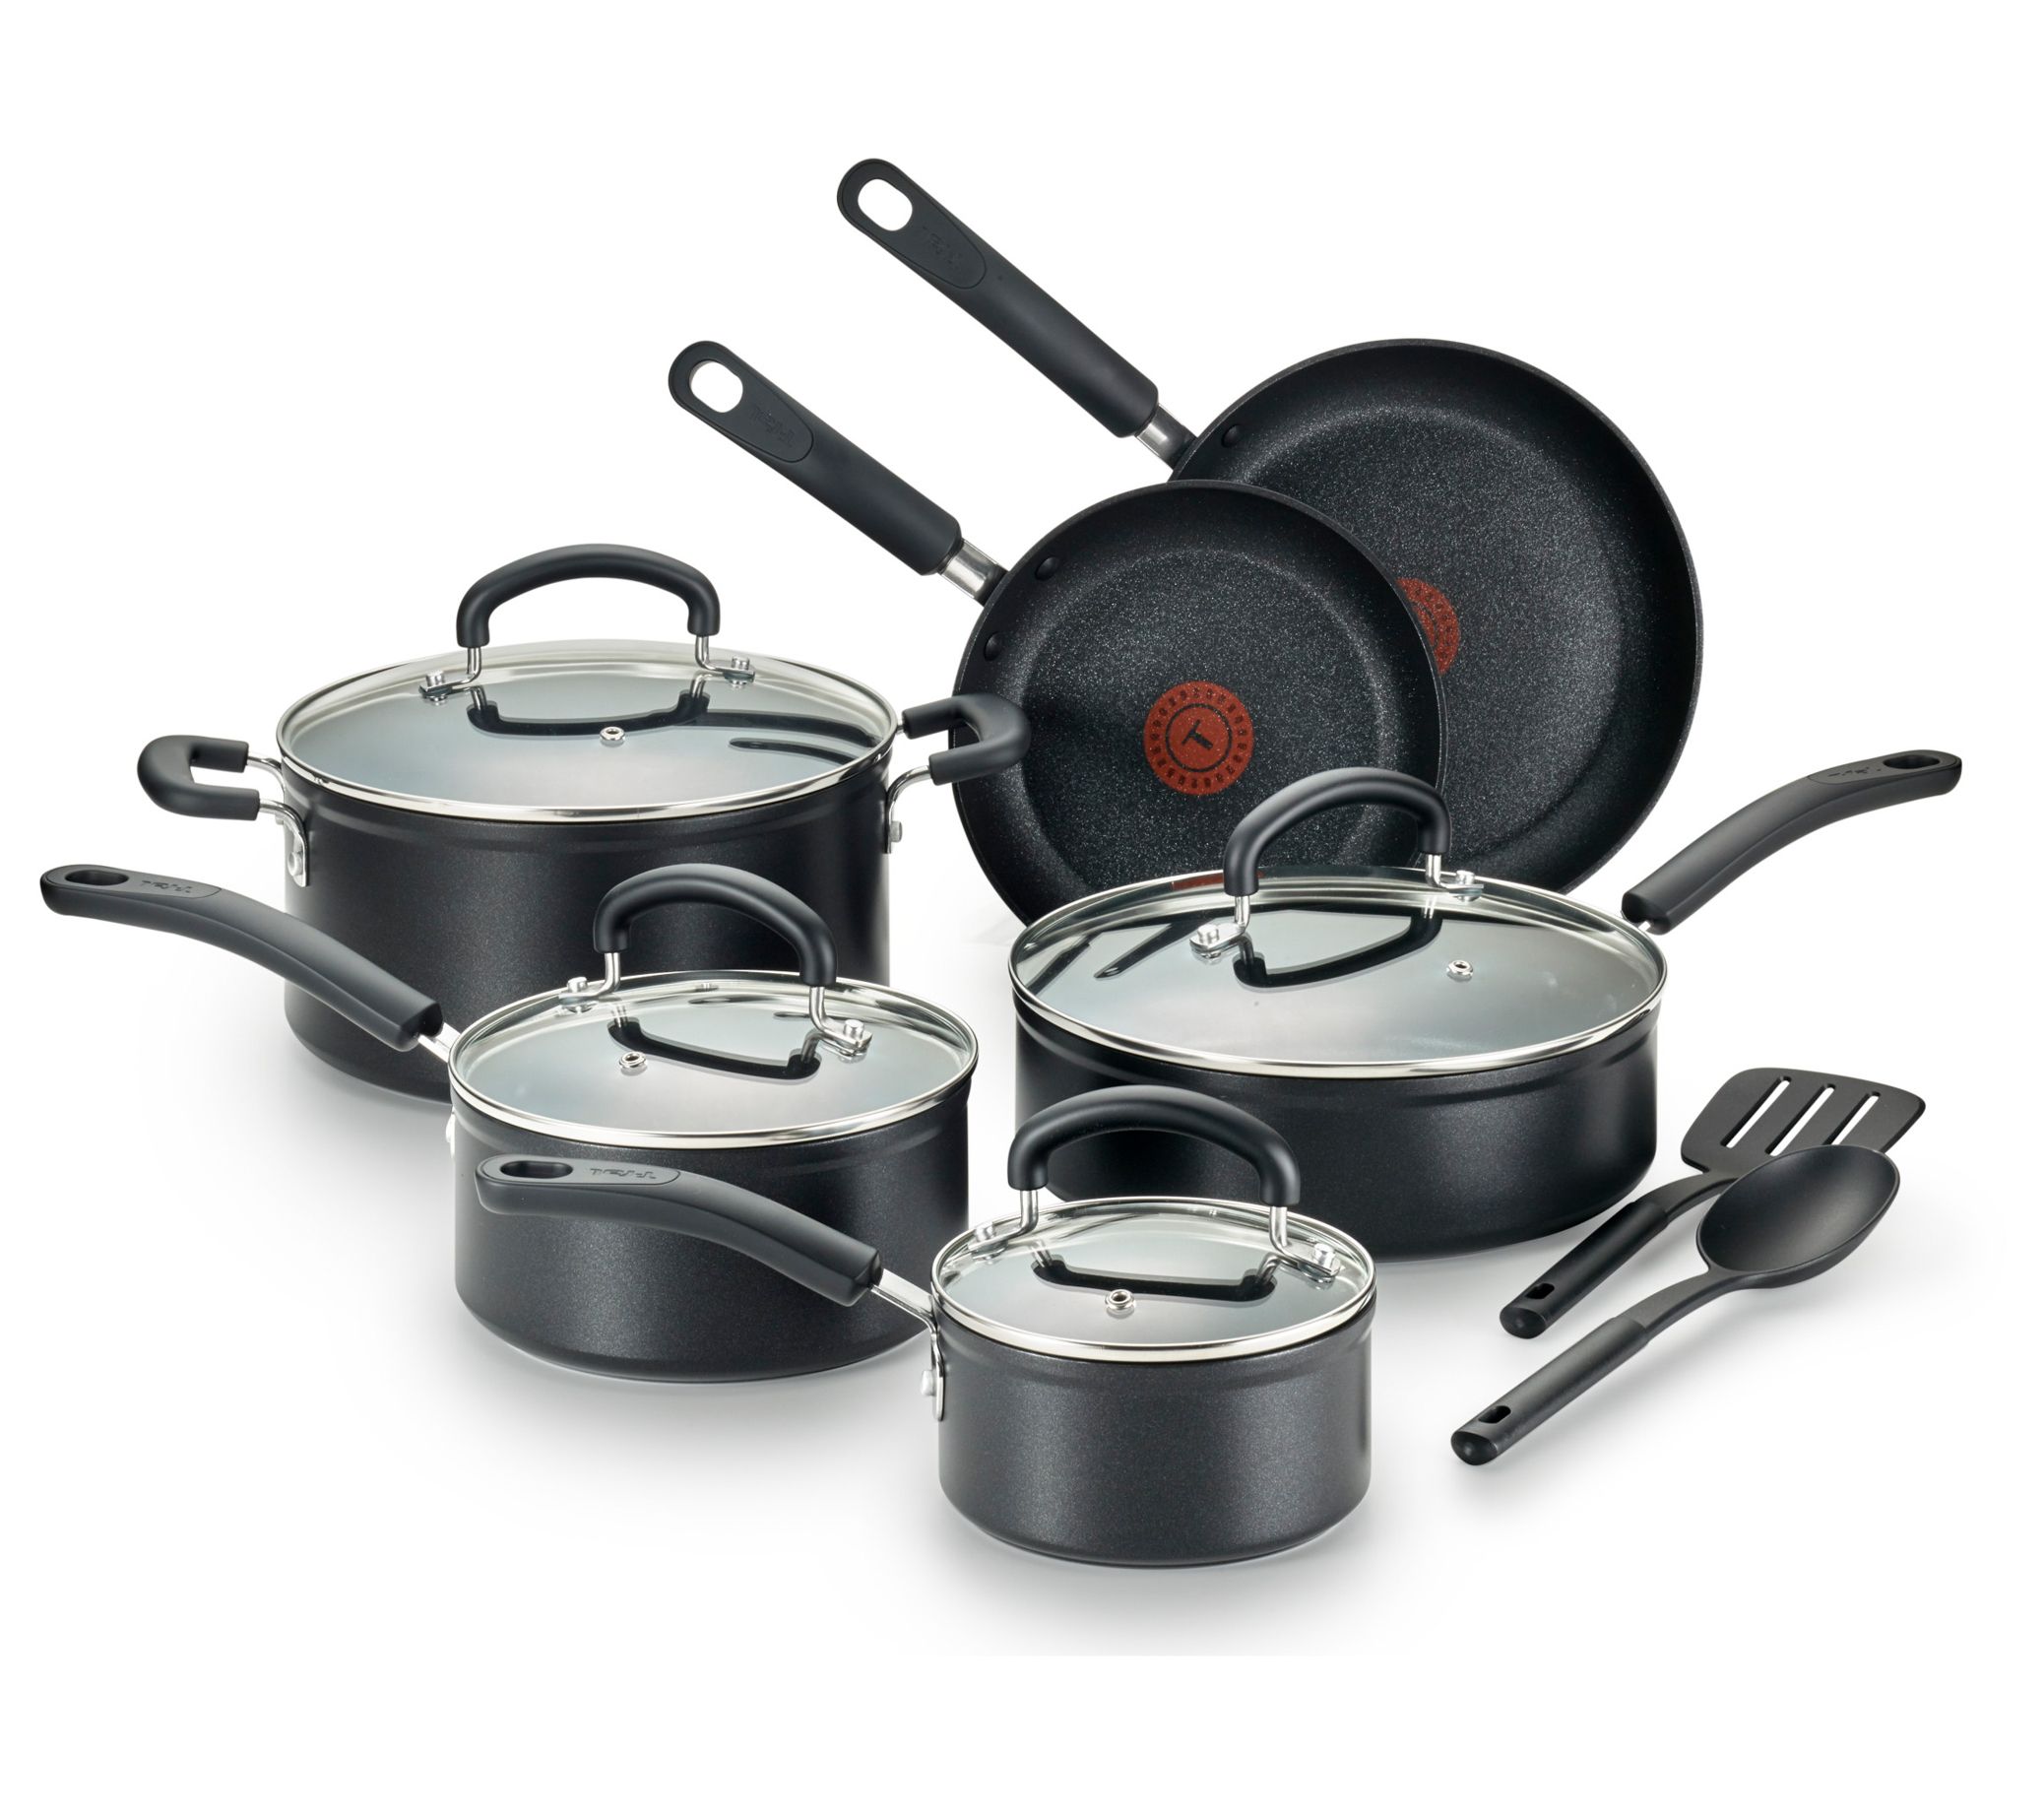 T-fal 12PC set Nonstick Cookware Set Pots and Pans Easy Care Cooking